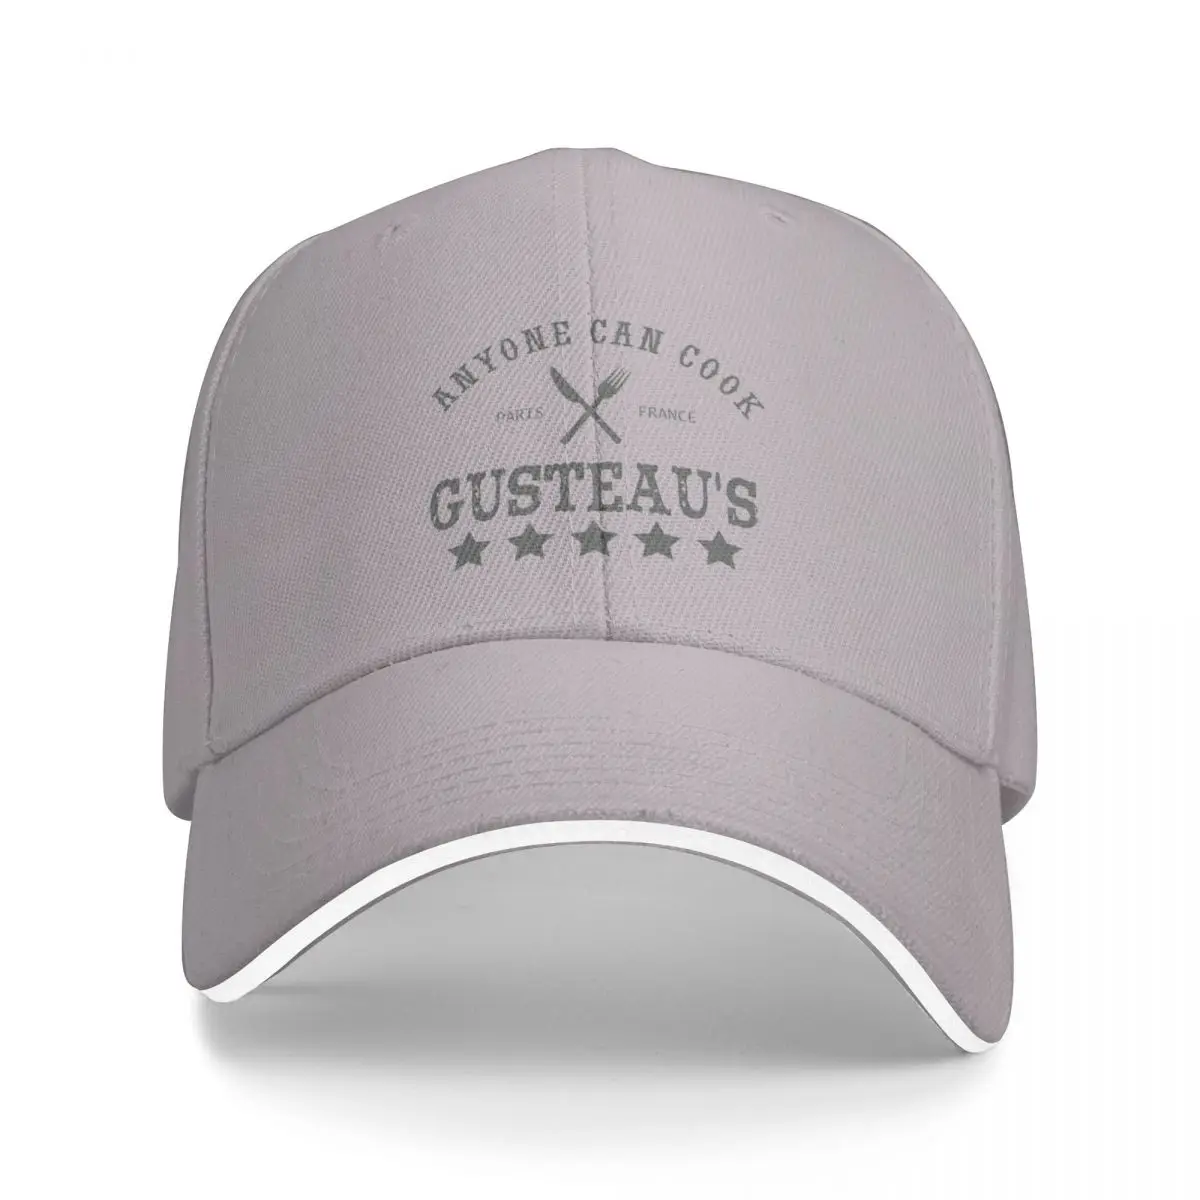 

TOOL BAND Anyone Can Cook Gusteau Funny Hats Baseball Cap Winter Hats Men's And Women's Hats